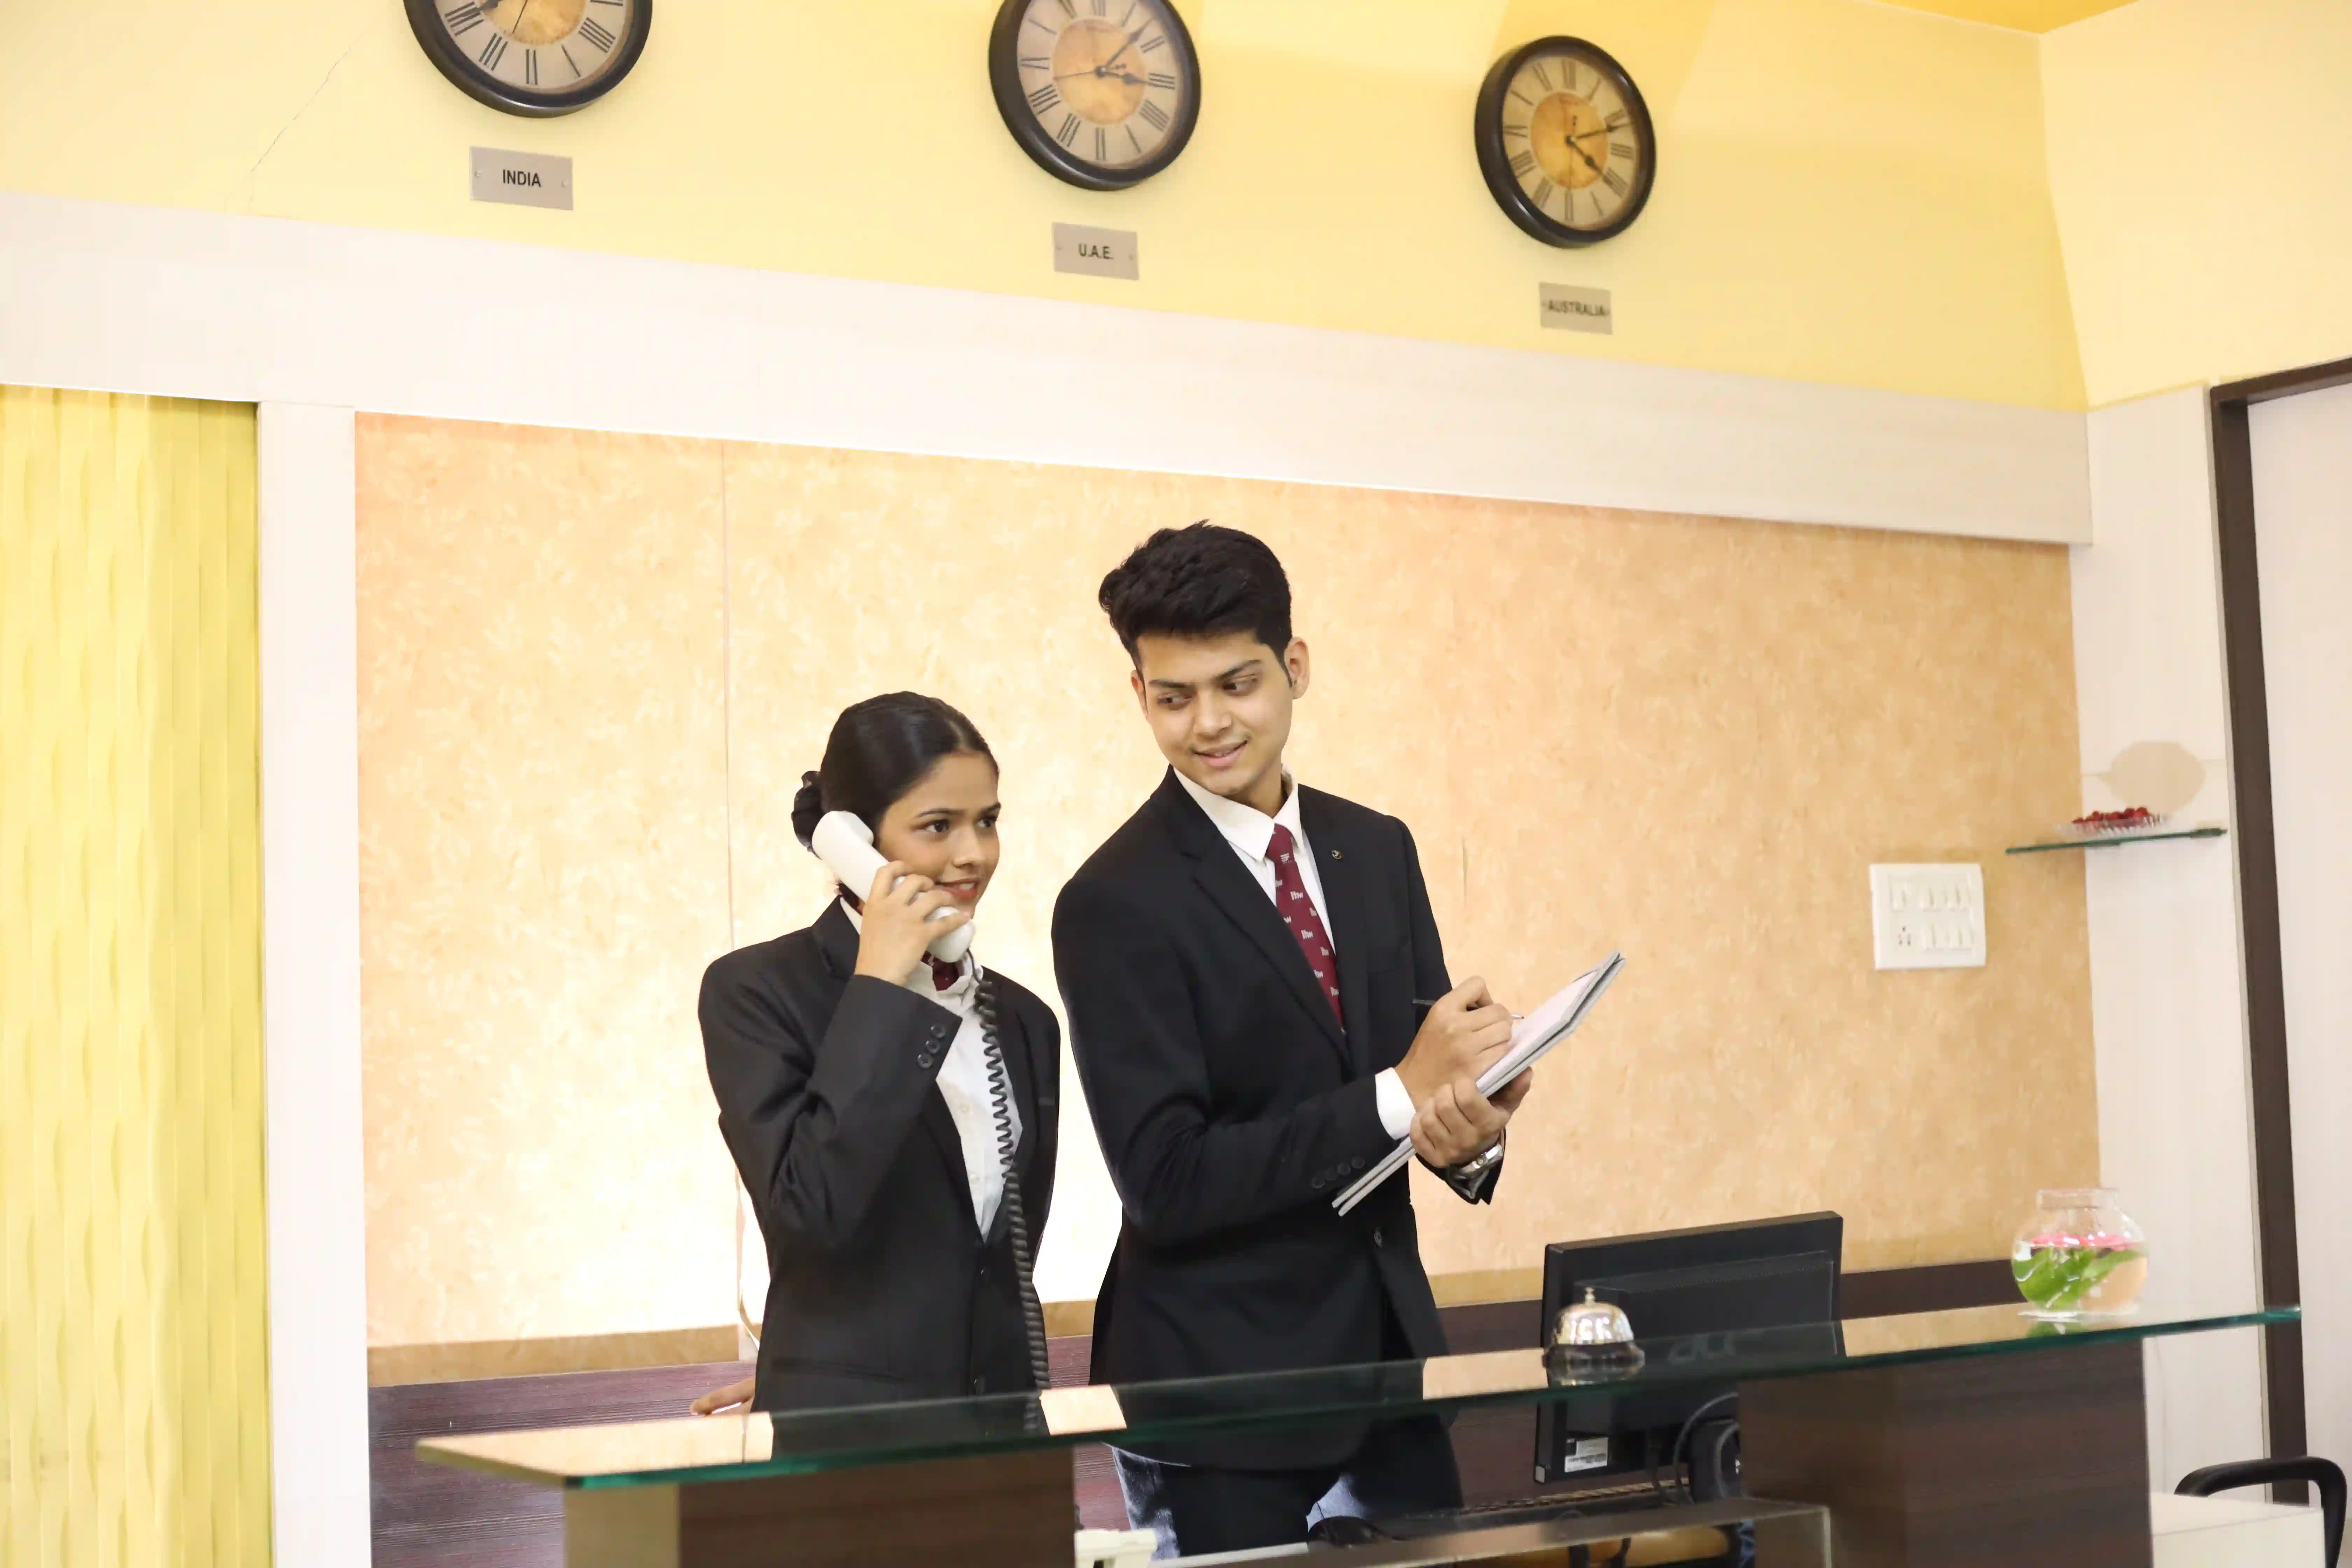 What Is the Difference Between Hotel Management and Hospitality Management?